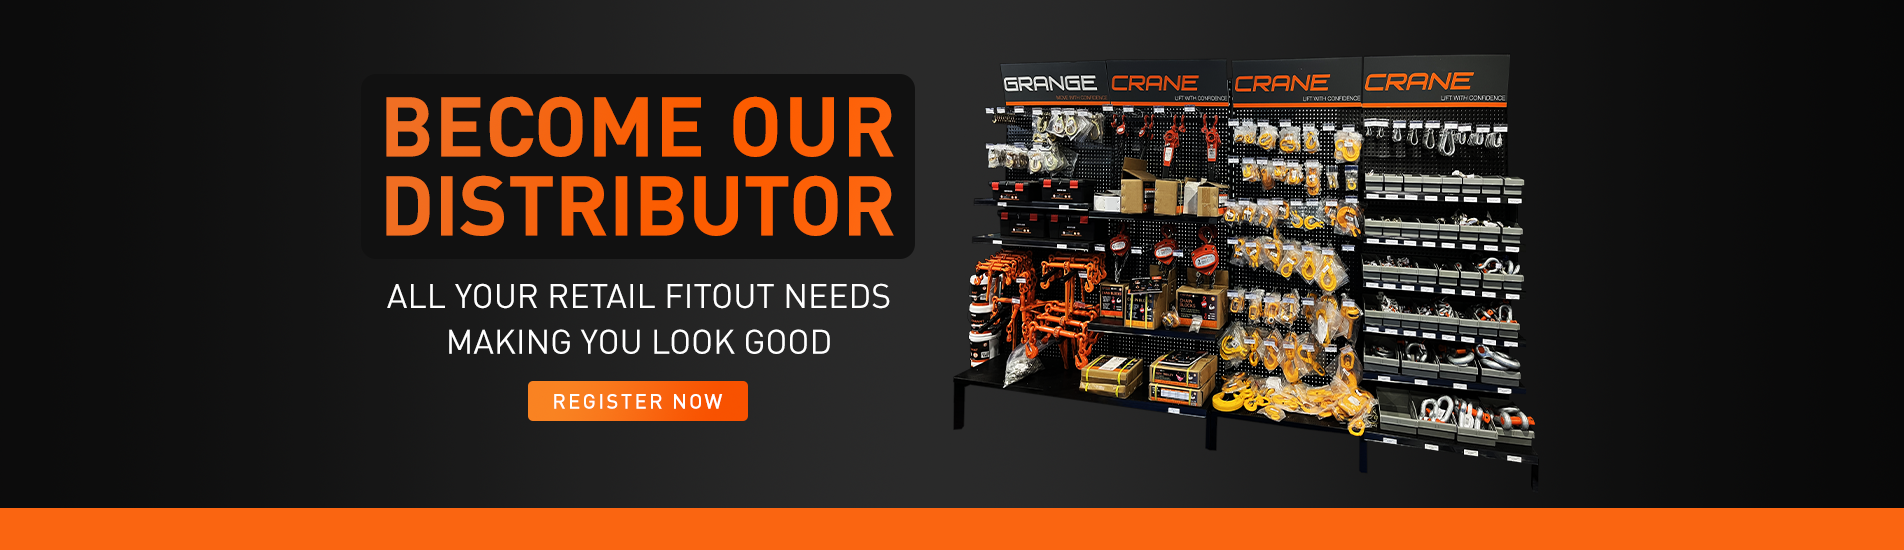 WE HAVE ALL YOUR RETAIL FITOUT NEEDS. MAKING YOU LOOK GOOD.